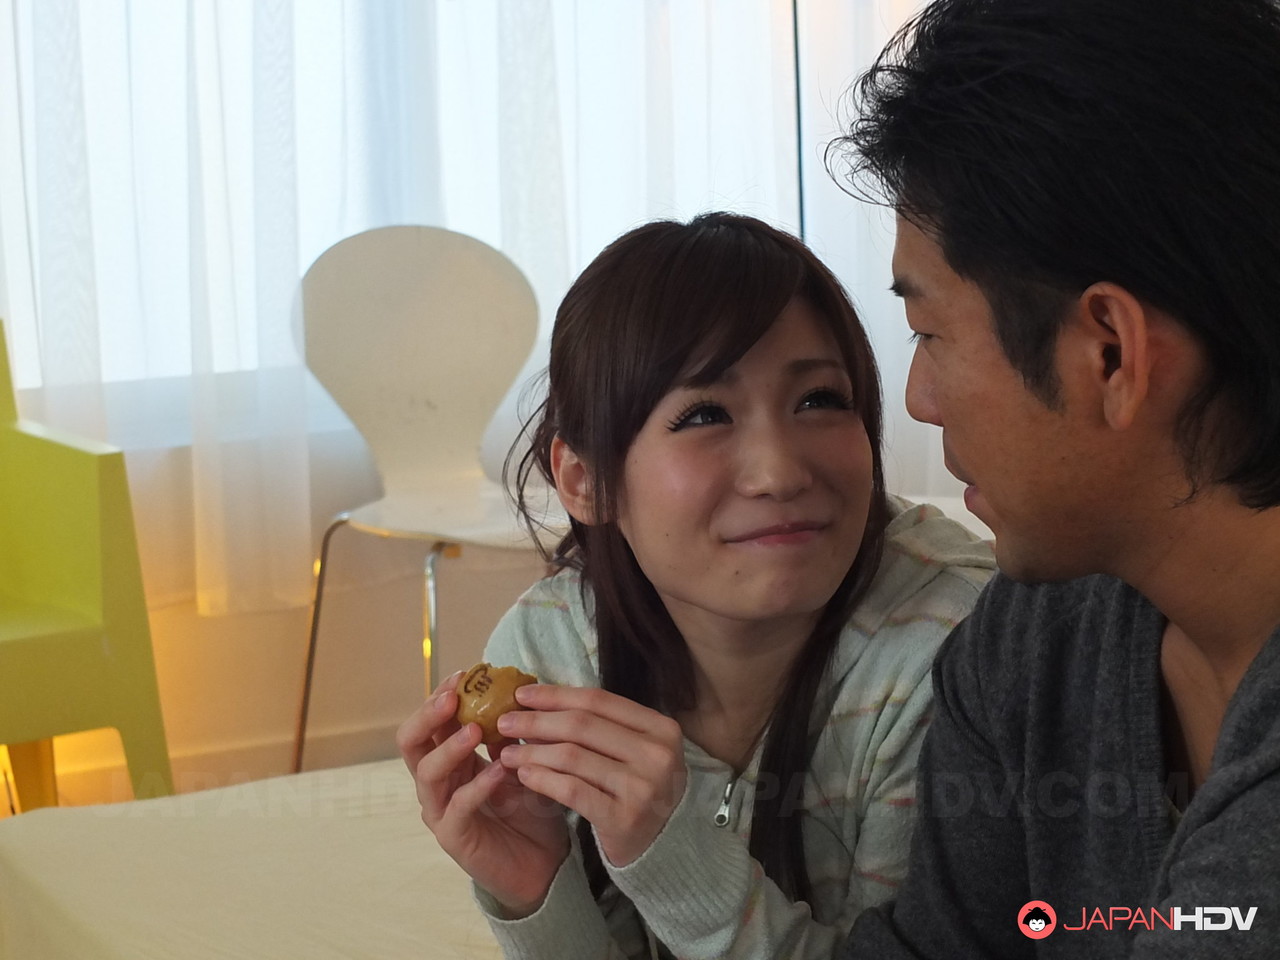 Asian nymphos with hot bodies Koi Miyamura and Tsukushi toy each other's clam 포르노 사진 #427162243 | Japan HDV Pics, Koi Miyamura, Tsukushi, Japanese, 모바일 포르노